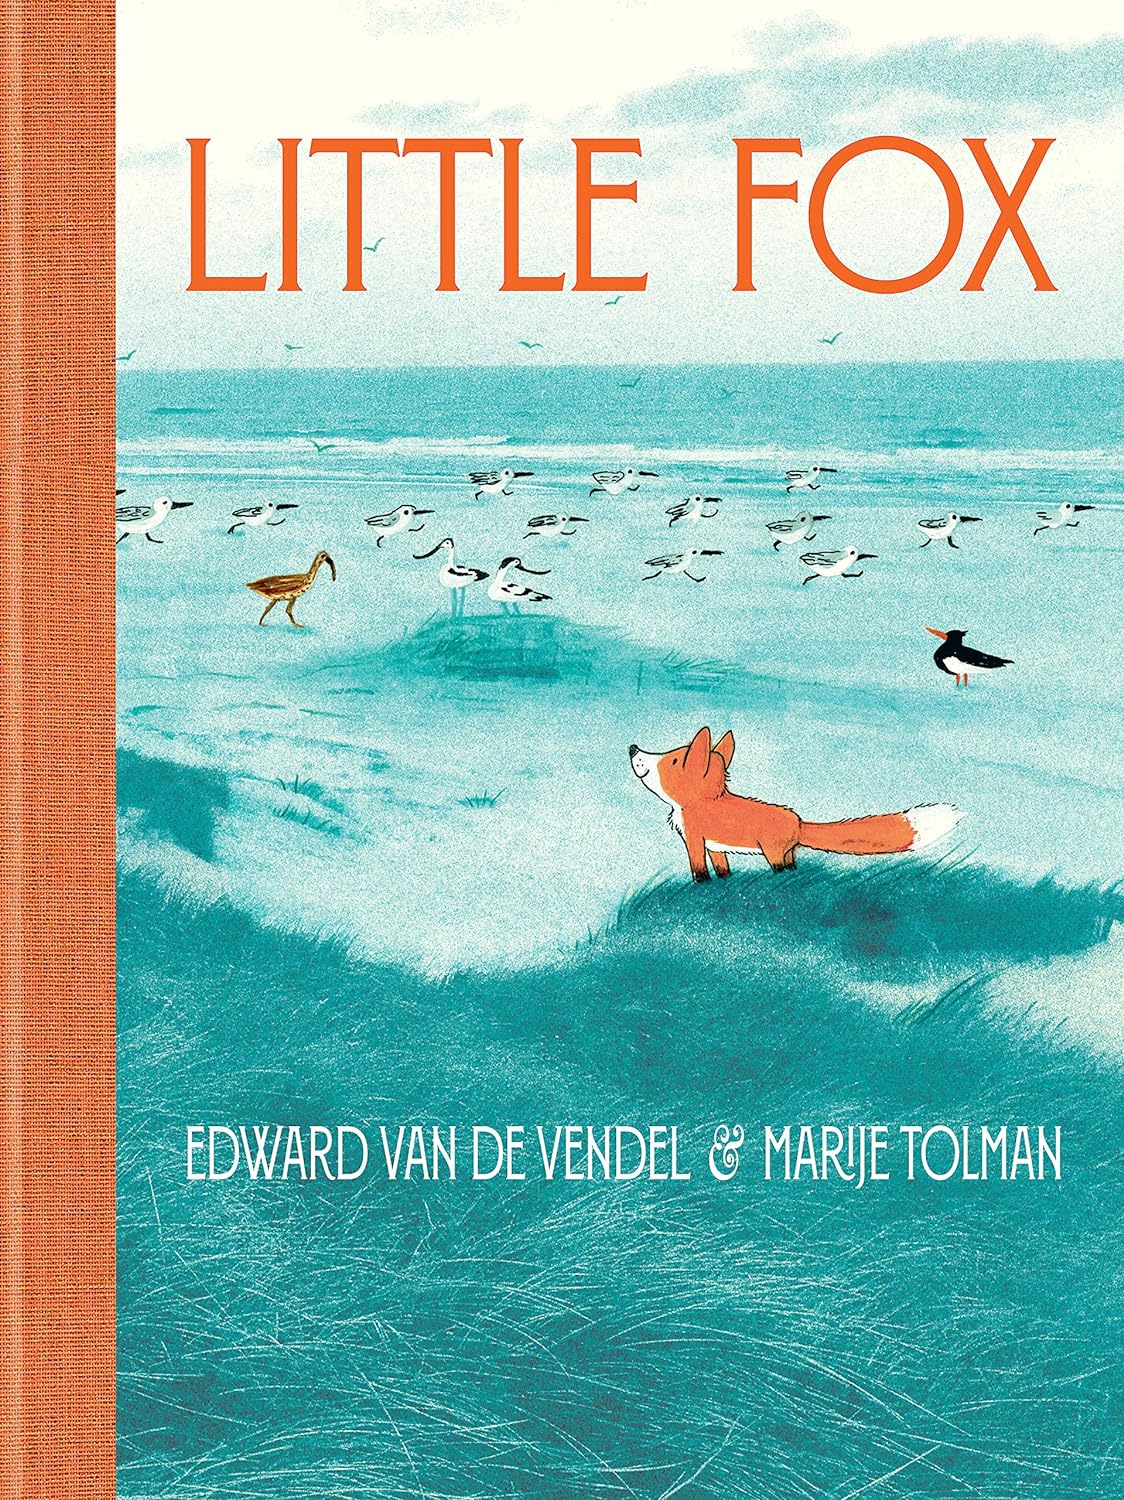 Marije Tolman's ingenious illustrations use a fresh technique that feels like a movie and a dream, starring the cheerful, bright orange Little Fox on grainy mixed media landscapes of blue and green. And when Little Fox wakes up, he's perhaps a little wiser, but still every bit as curious and full of life.